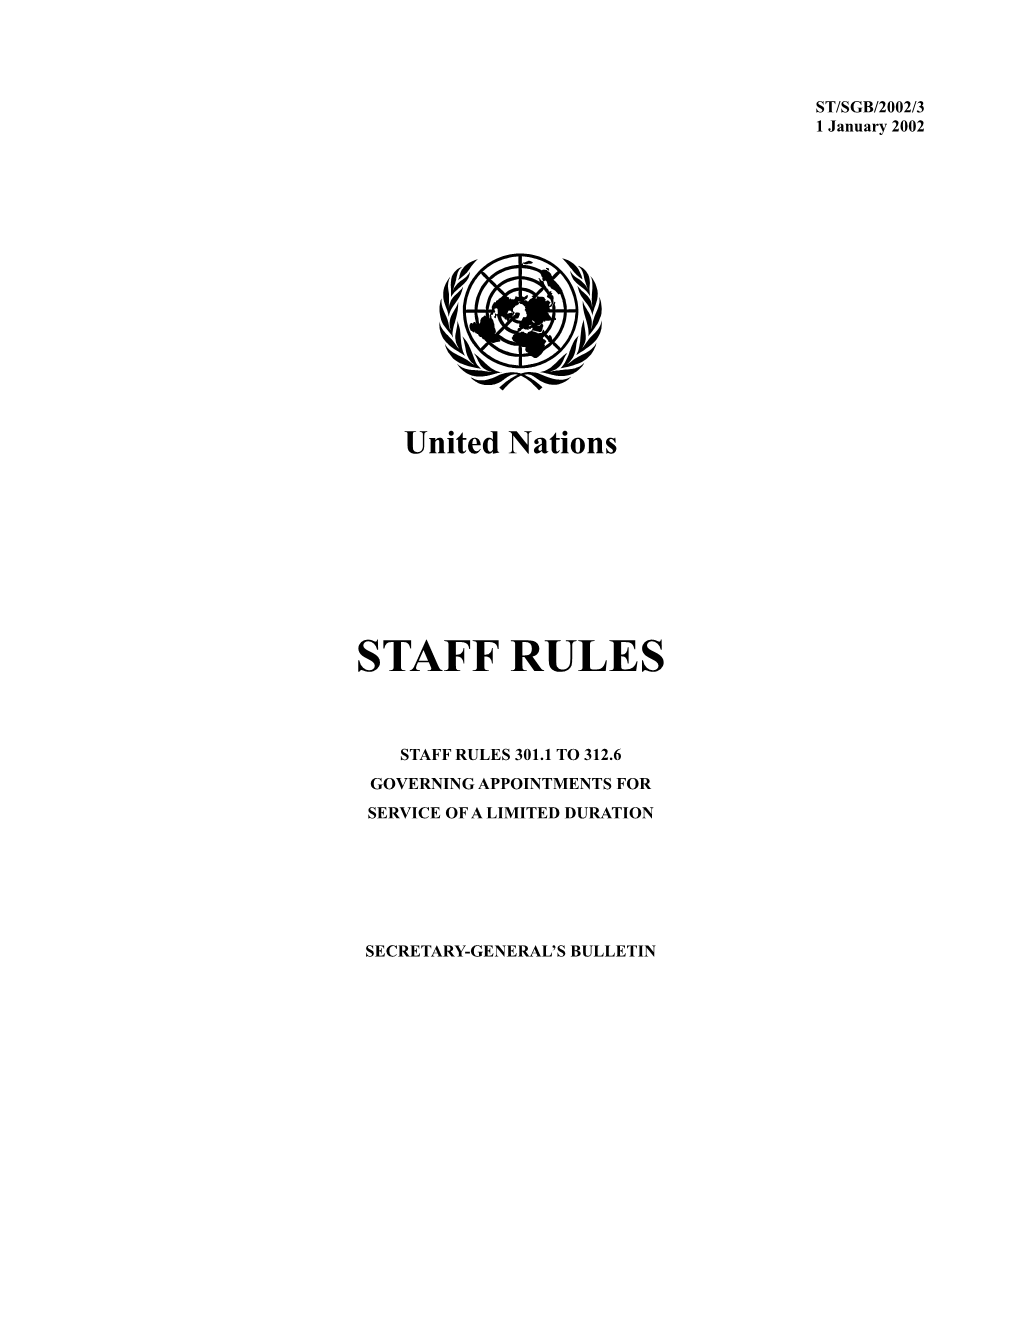 Appendices to the 300 Series of the Staff Rules